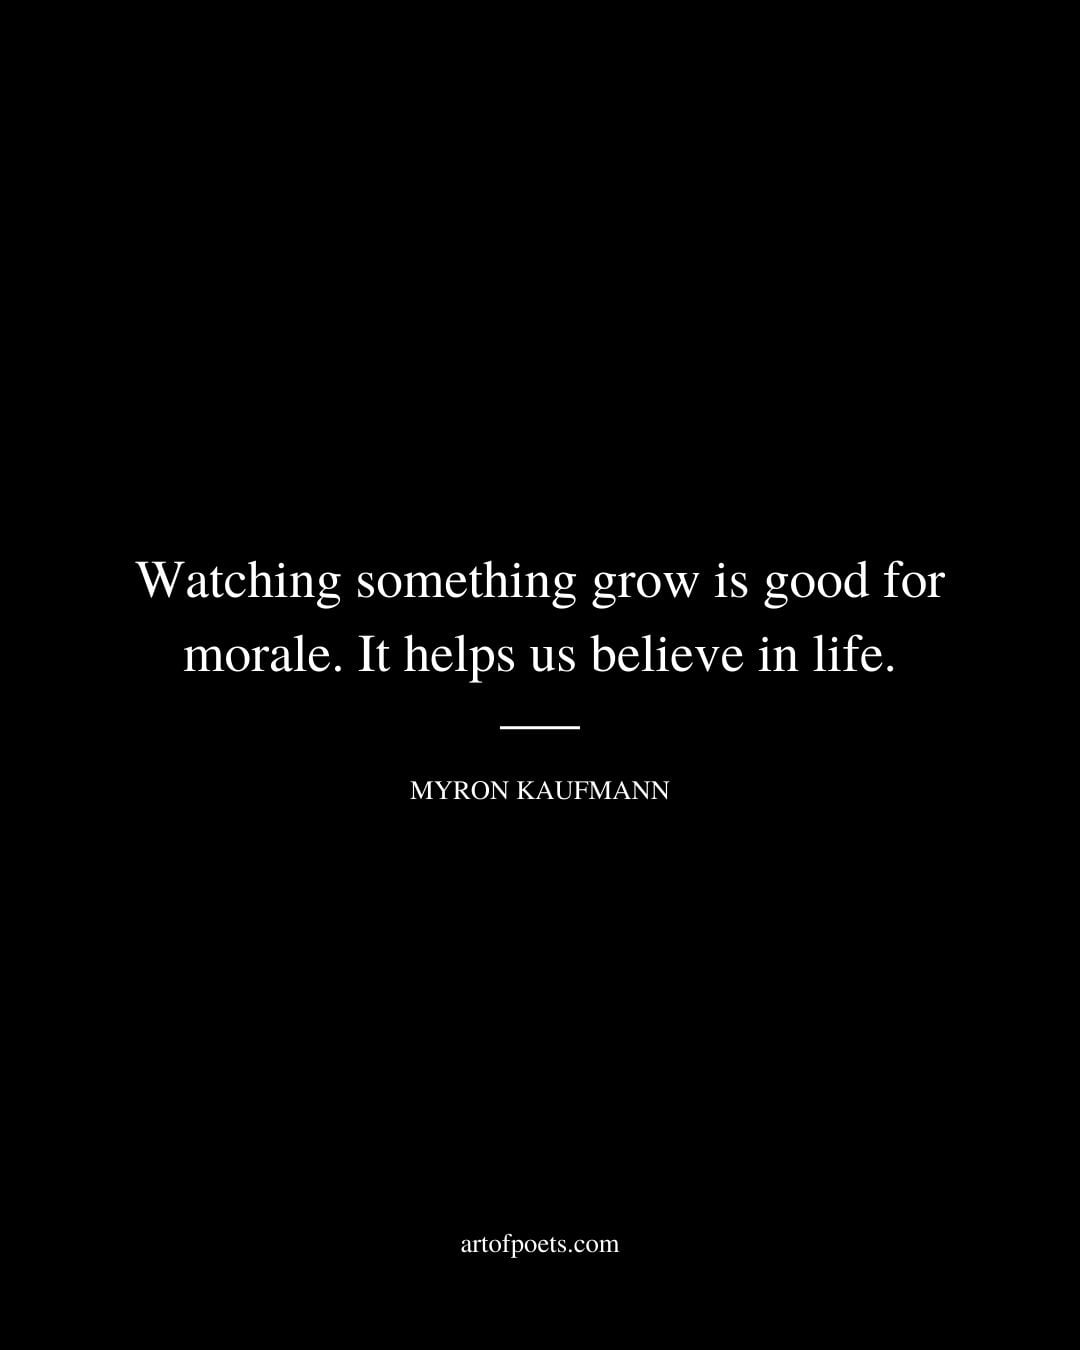 Watching something grow is good for morale. It helps us believe in life. Myron Kaufmann